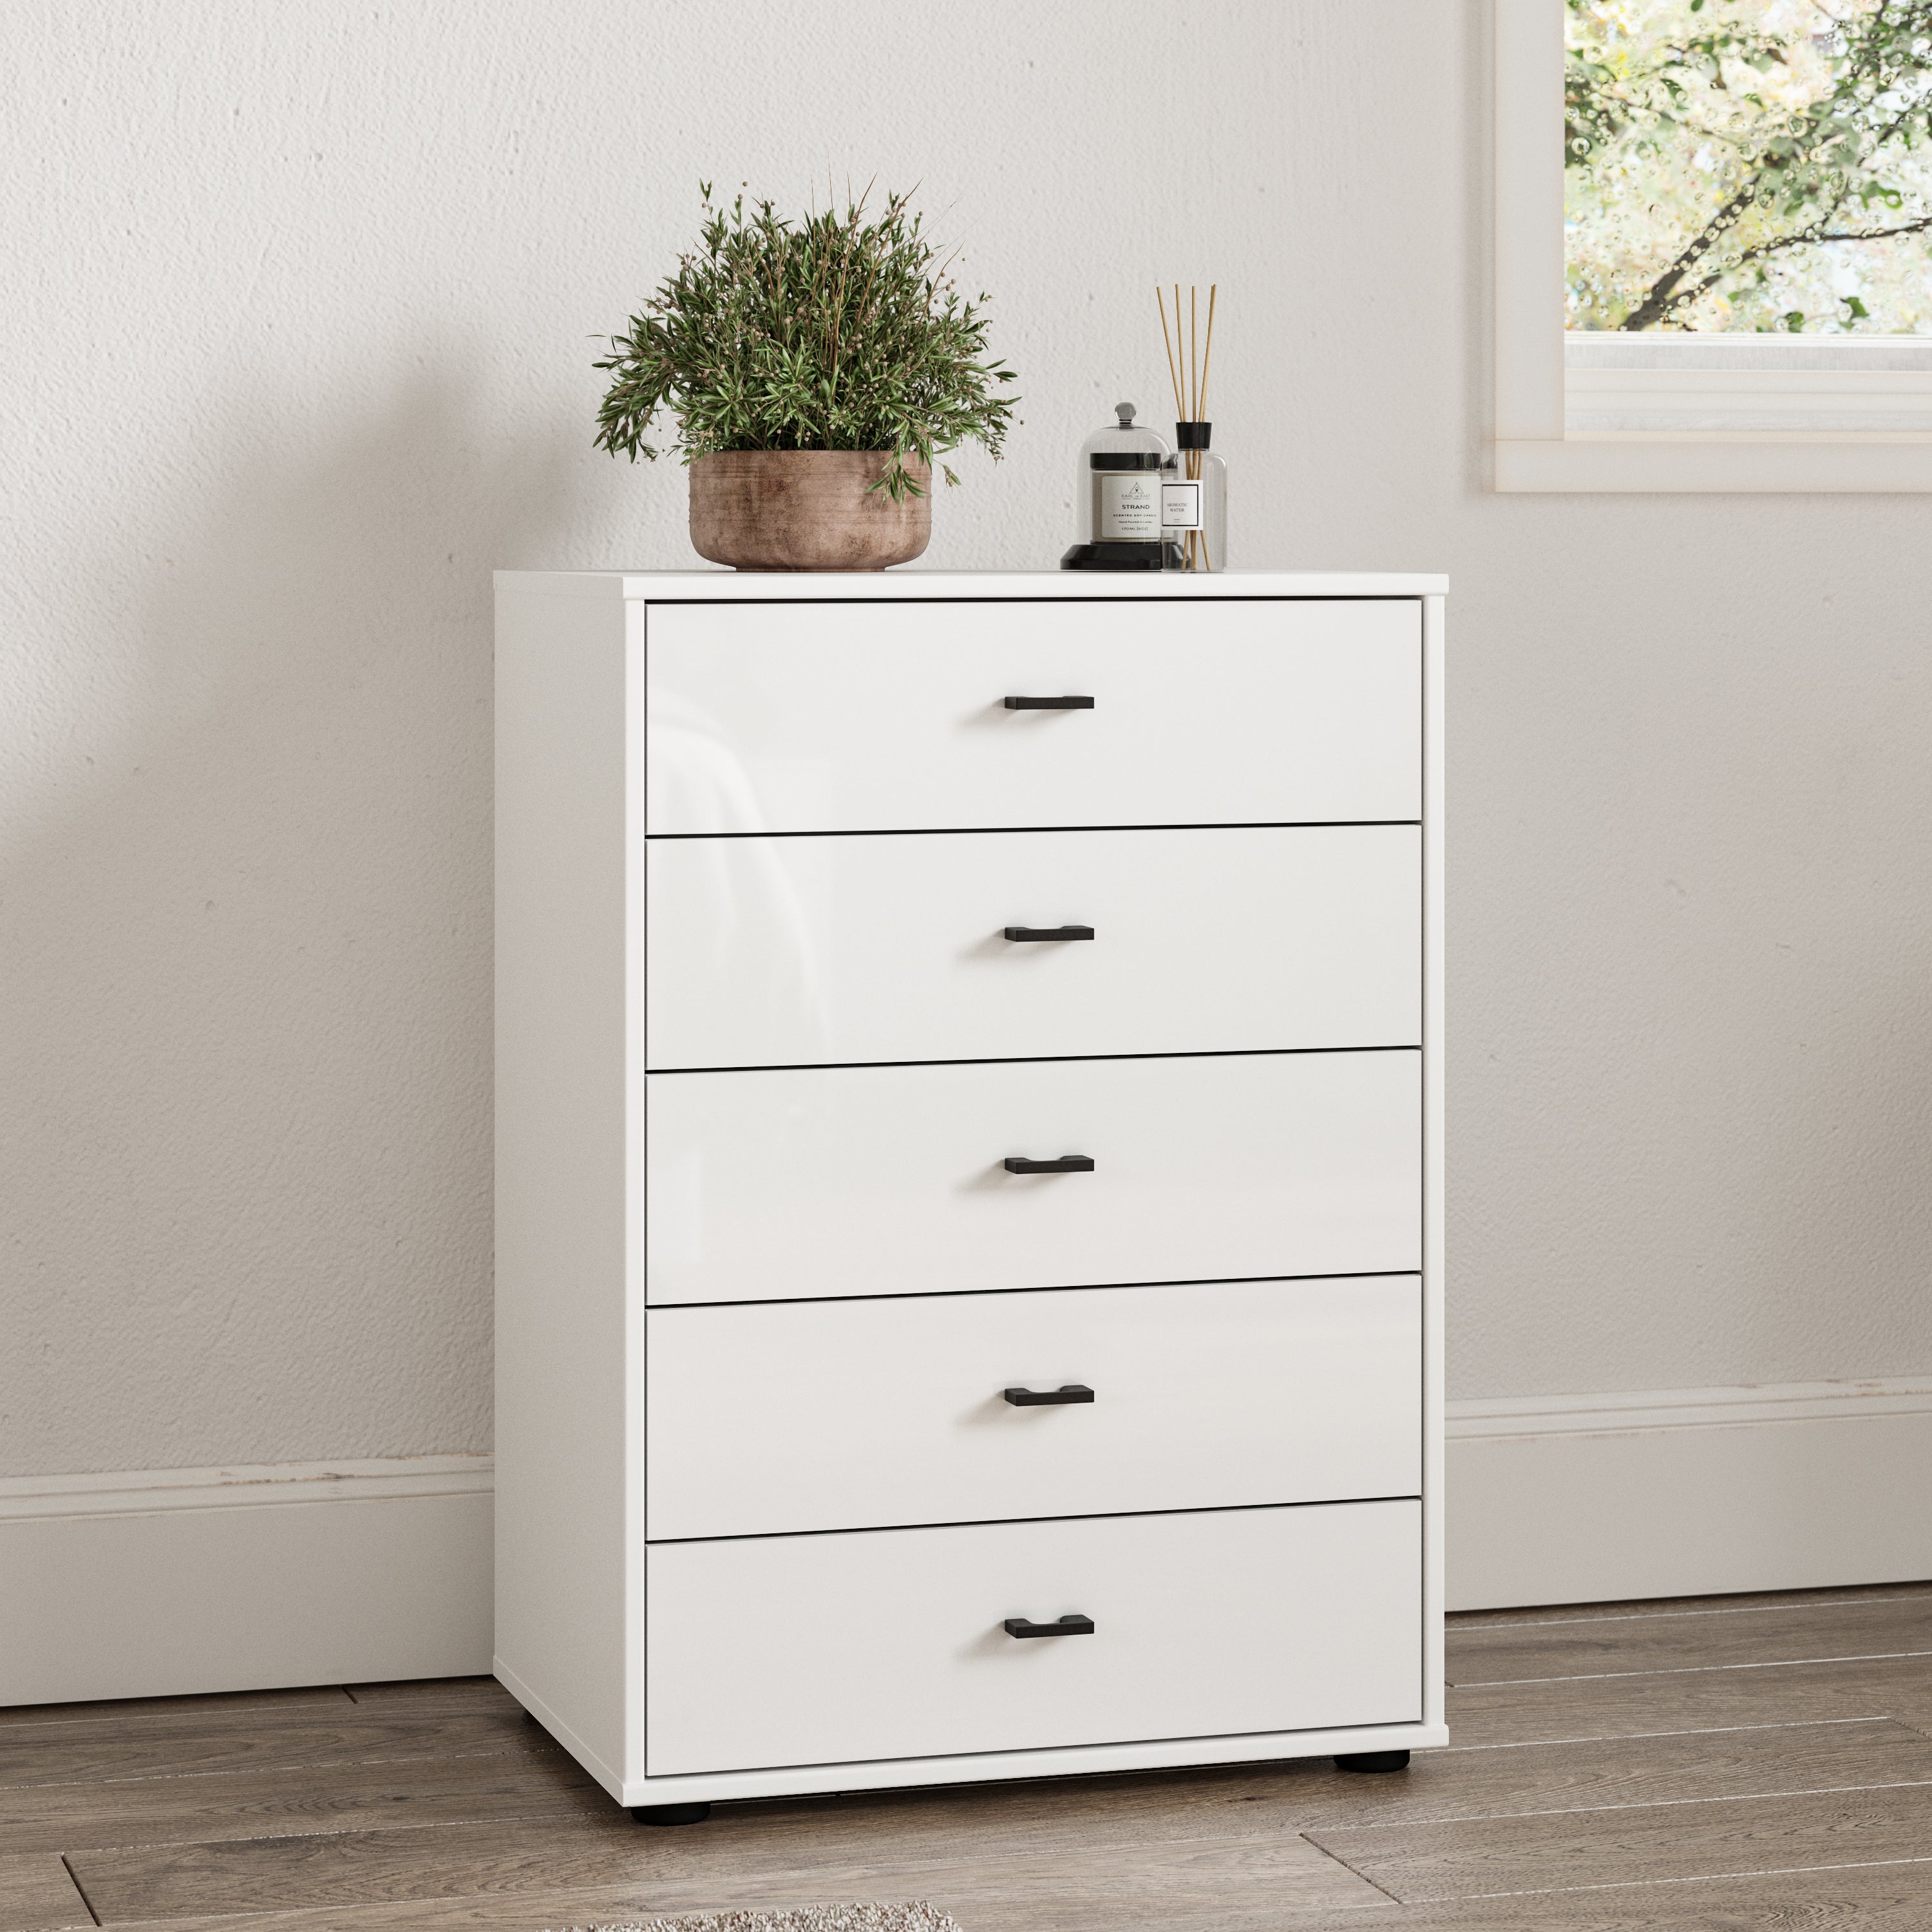 Wiemann Kahla Glass Fronted Small 5 Drawer Chest Off-White